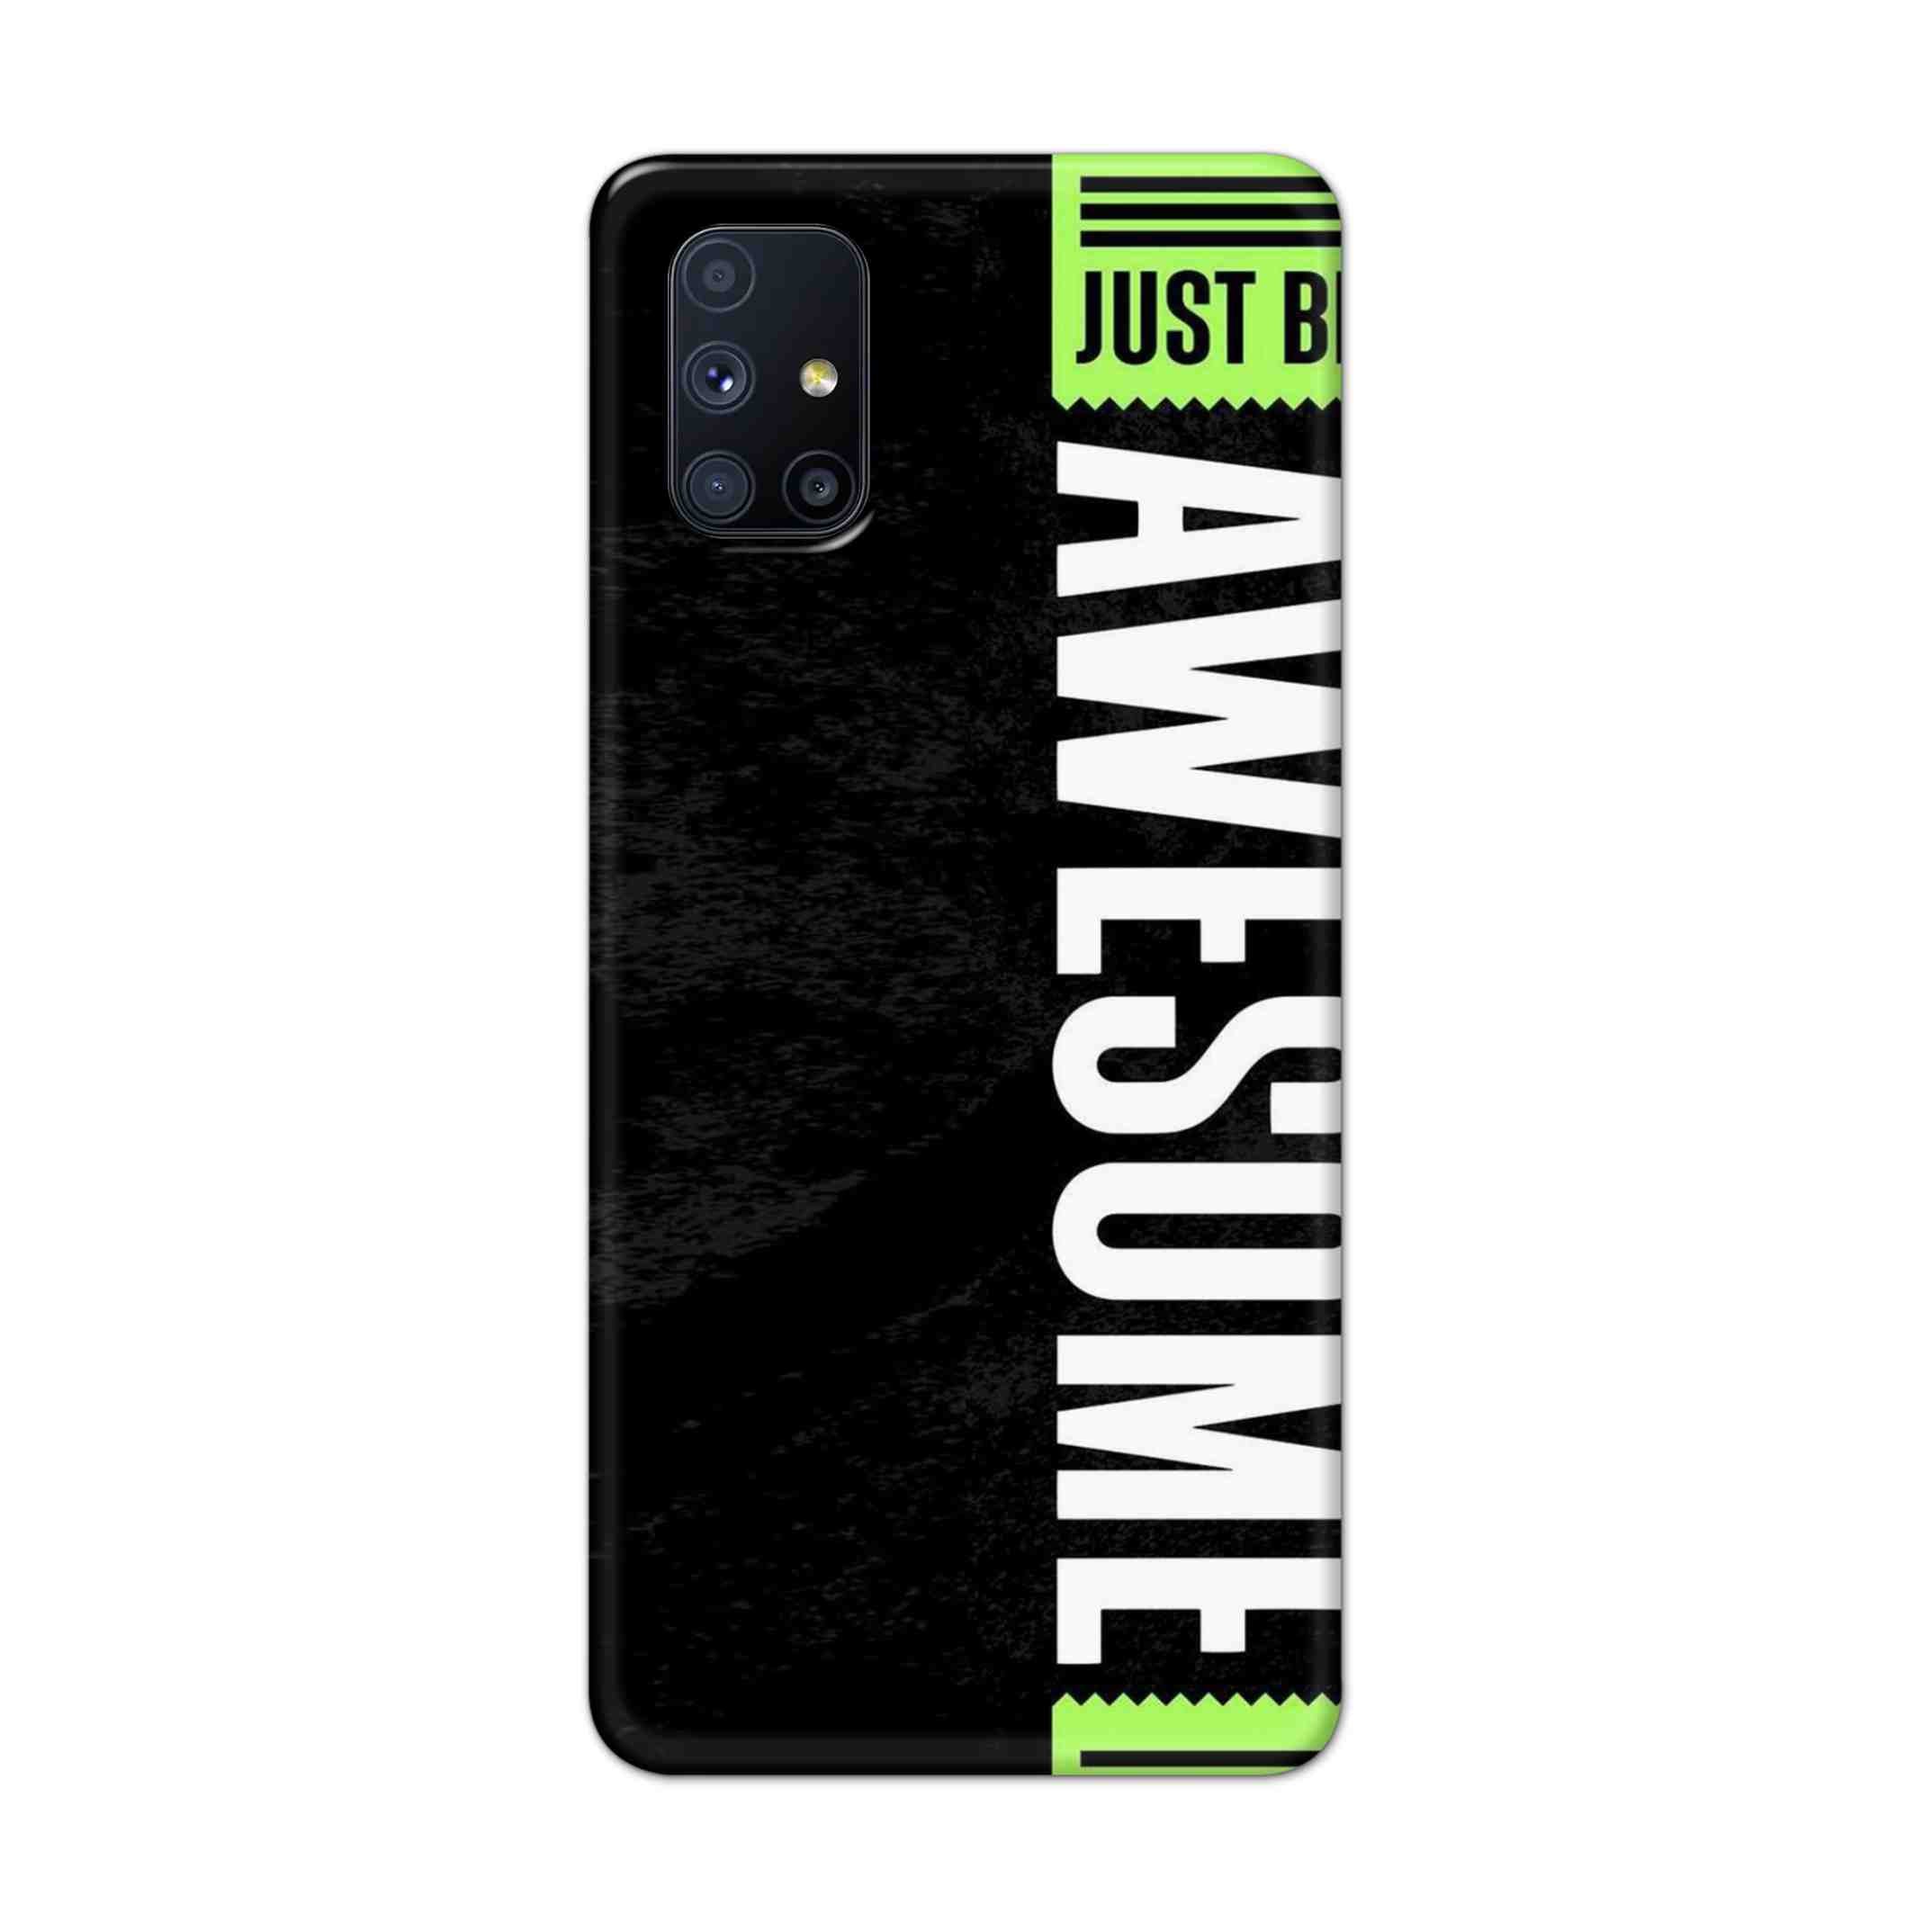 Buy Awesome Street Hard Back Mobile Phone Case Cover For Samsung Galaxy M51 Online